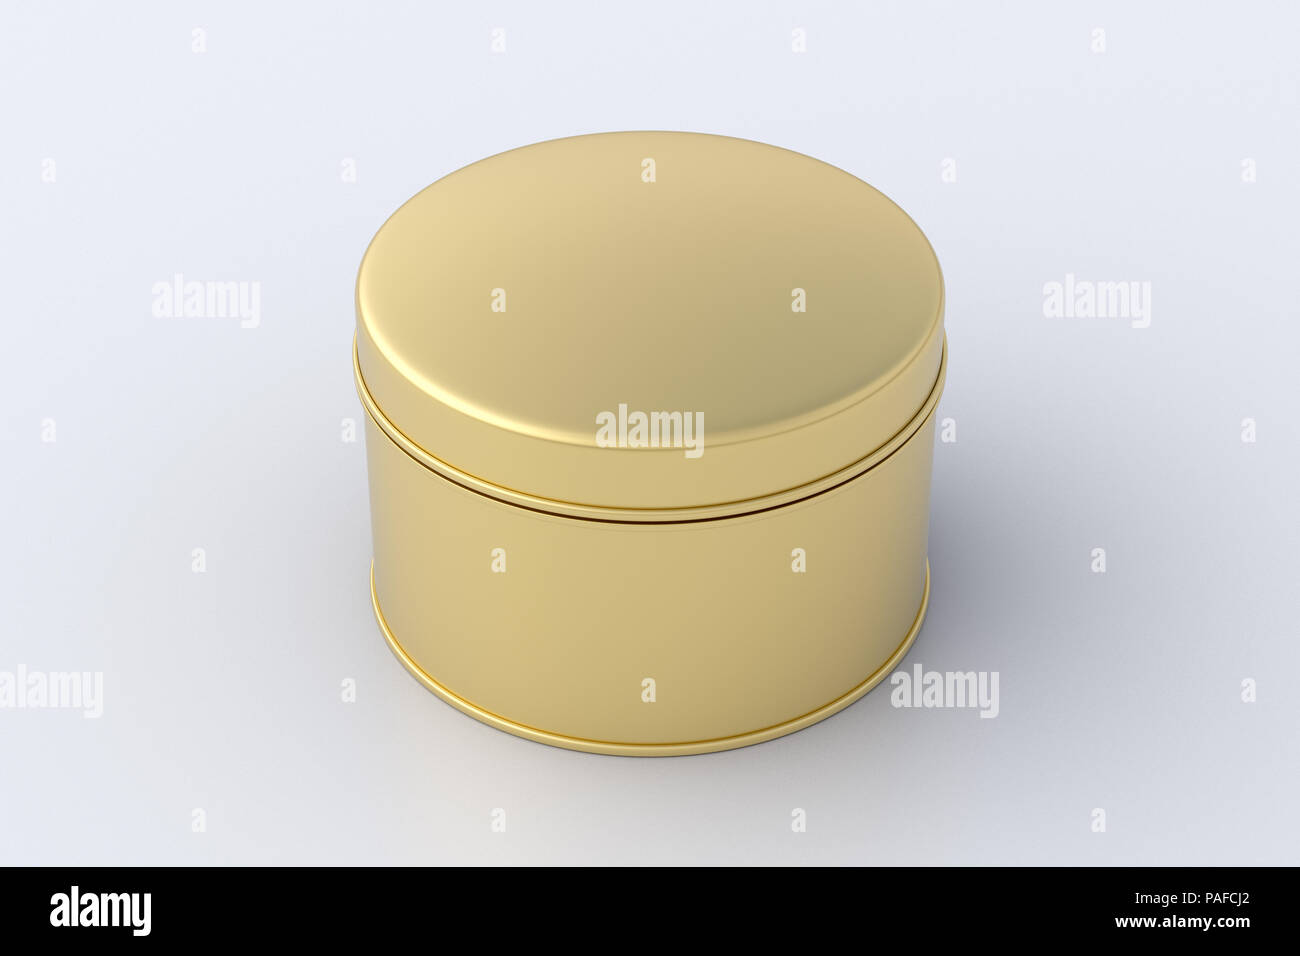 Download Blank Closed Gold Round Tin Container Box On White Background Package Mockup With Clipping Path Around Container 3d Illustration Stock Photo Alamy